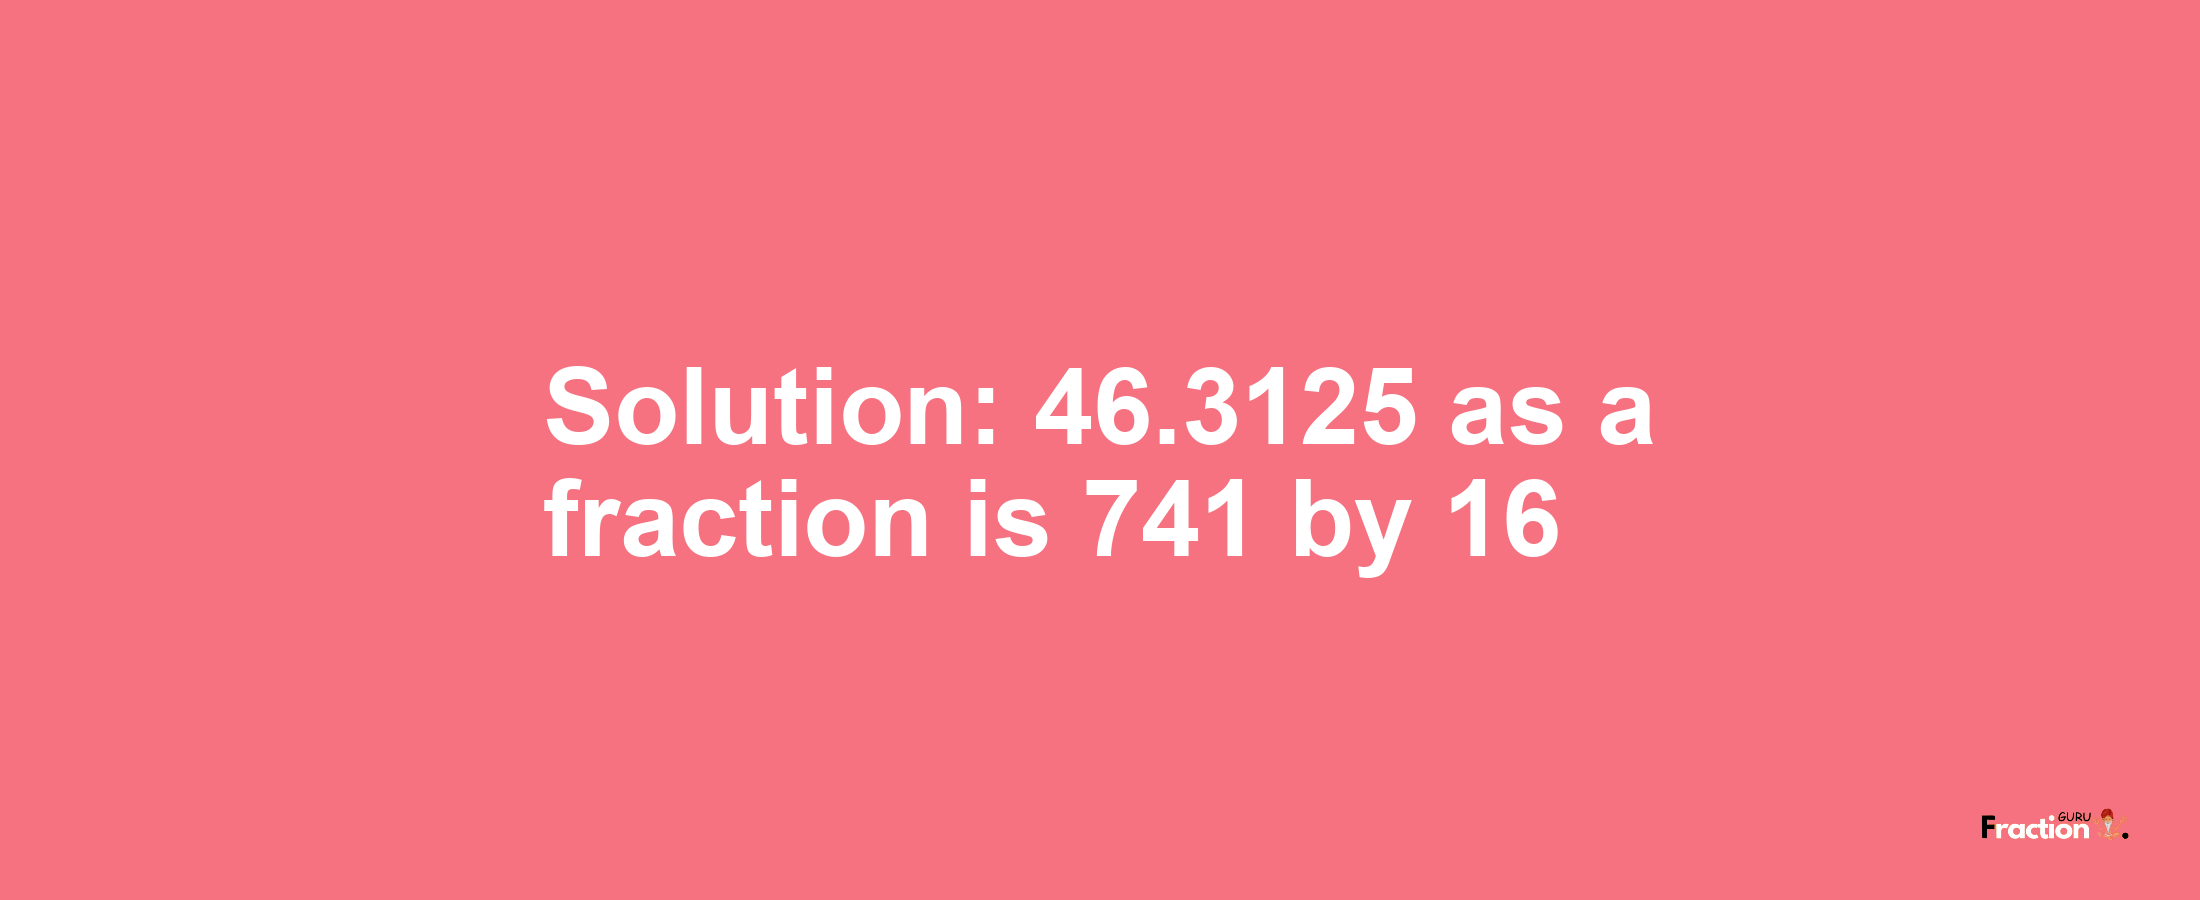 Solution:46.3125 as a fraction is 741/16